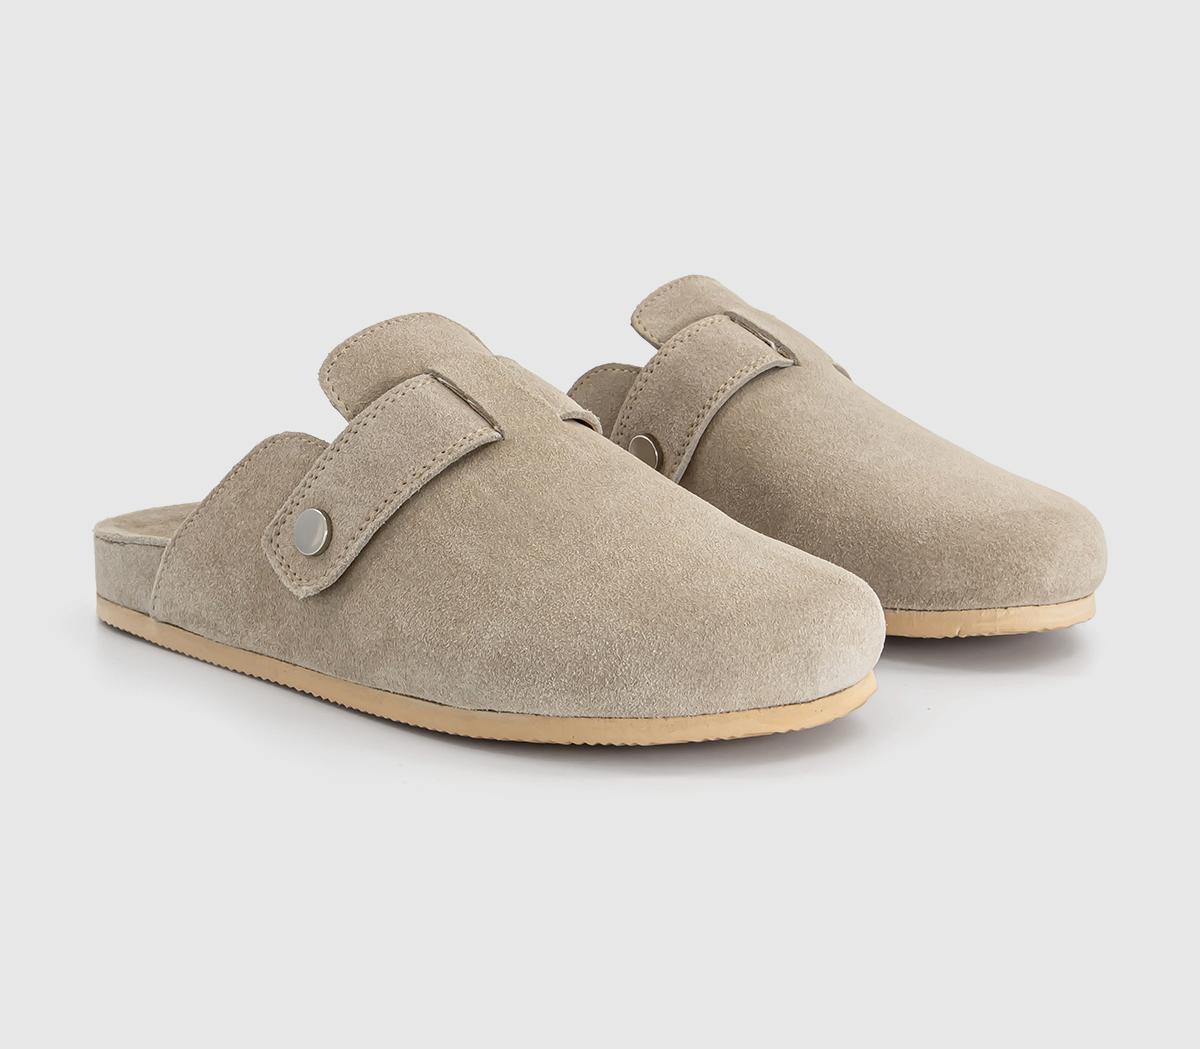 OFFICE Womens Star Buckle Detail Slip On Clogs Taupe Suede Grey, 9